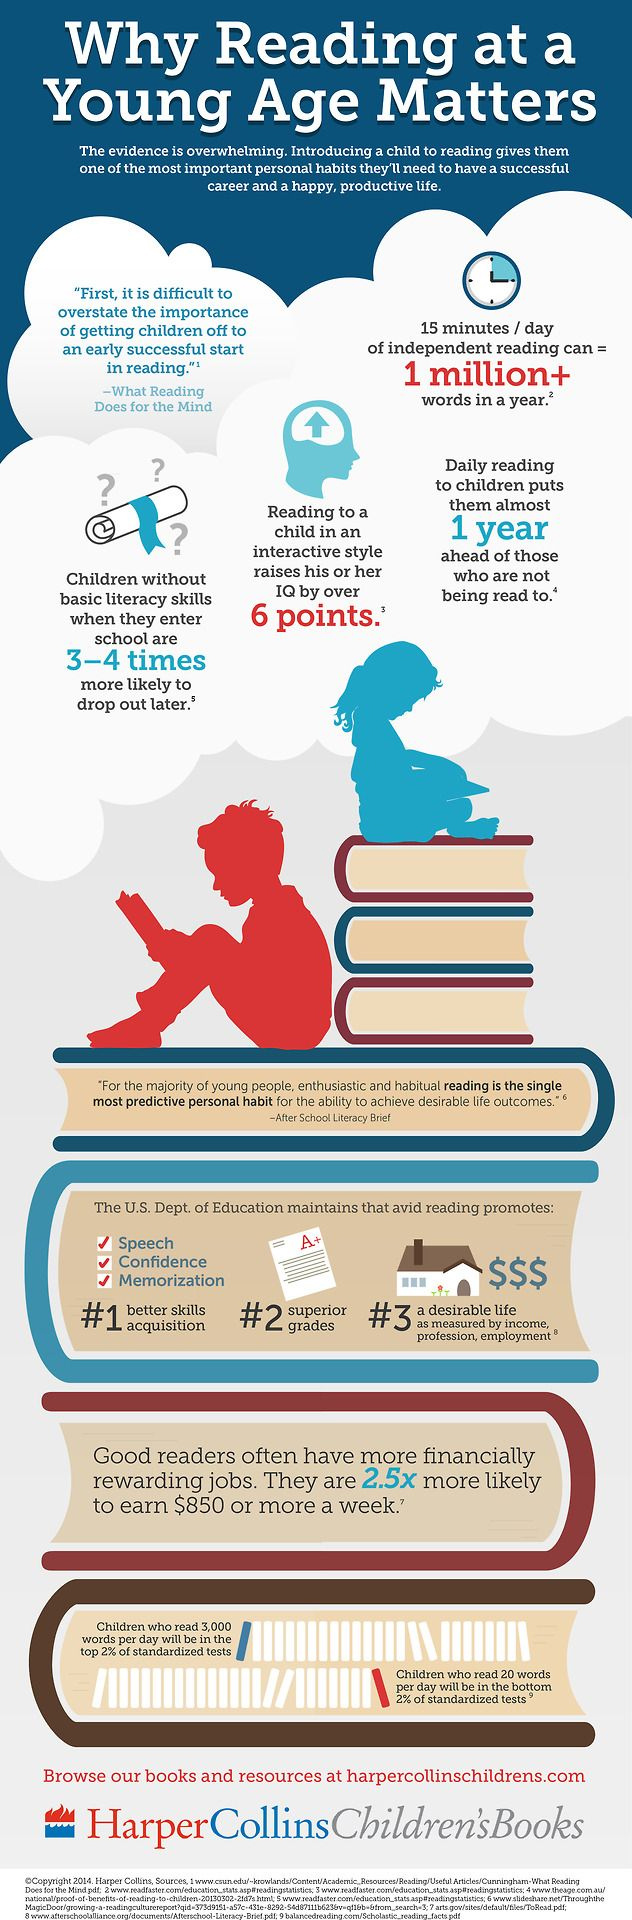 Why Reading at a Young Age Matters